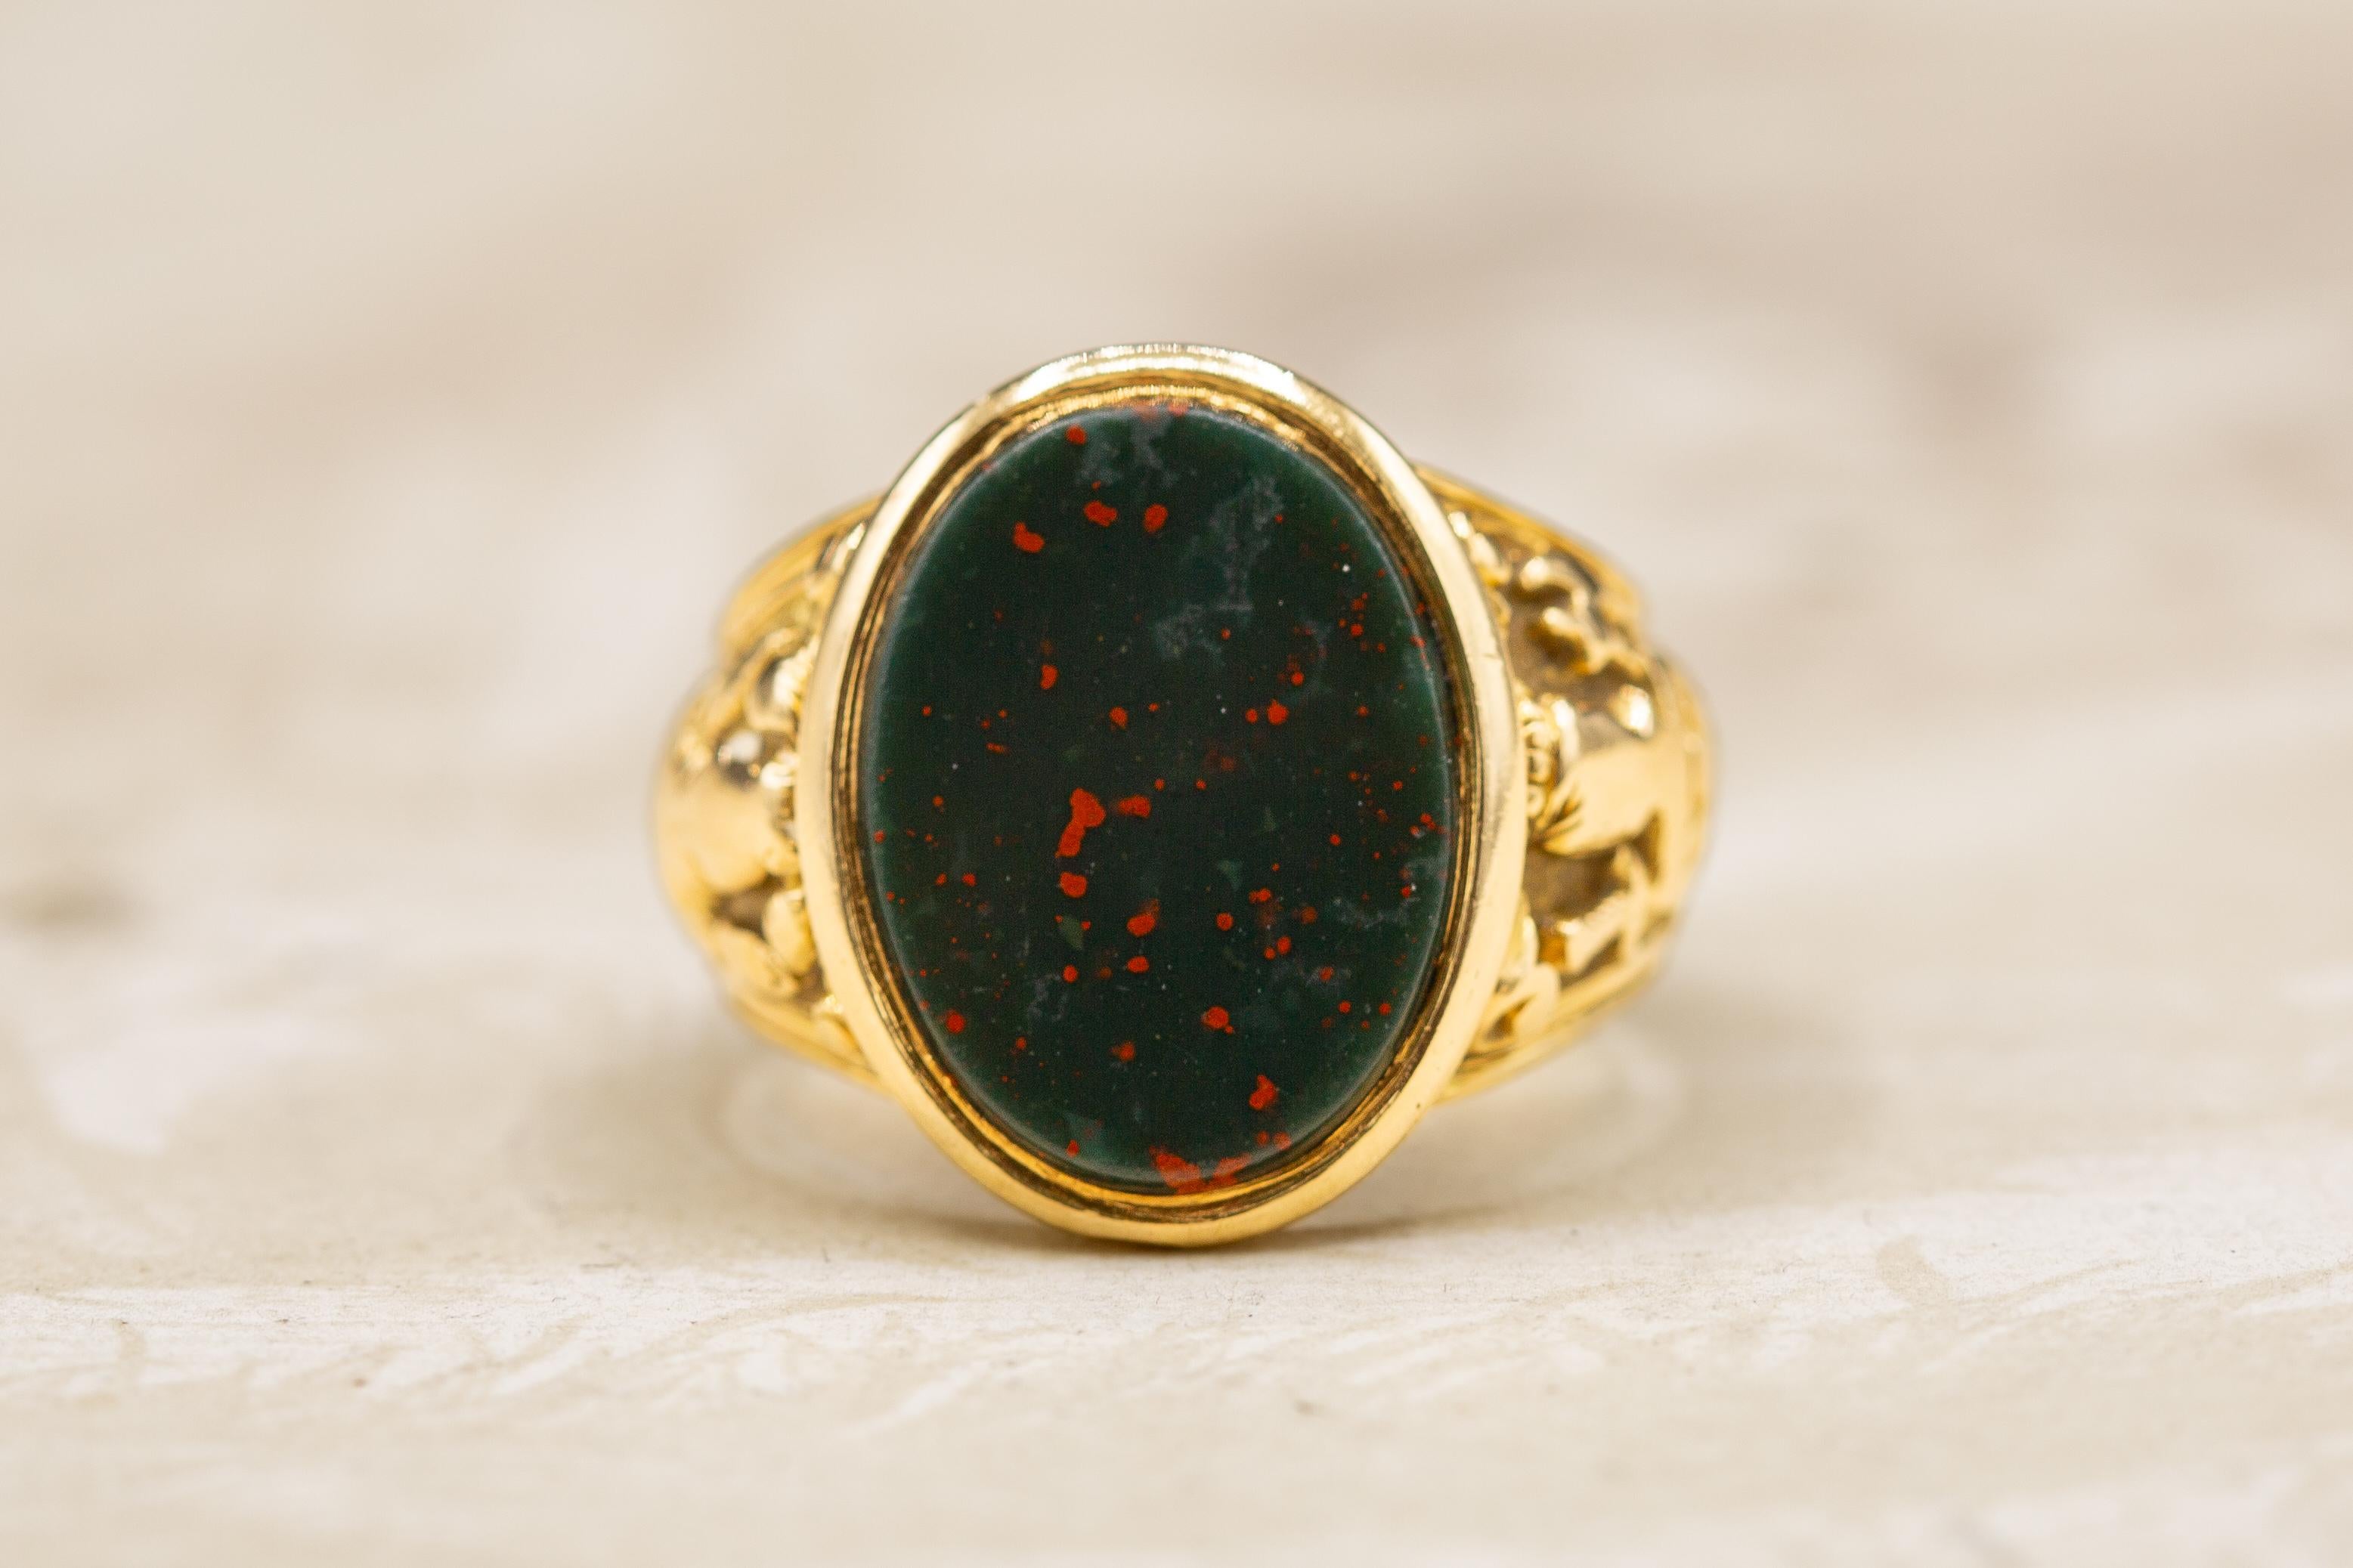 A superb and heavy solid 18K gold antique signet ring, made in 19th century Victorian England, circa 1890. 

The centrepiece of this substantial gold ring is an oval bloodstone gemstone with excellent colouration and evenly spread bright red